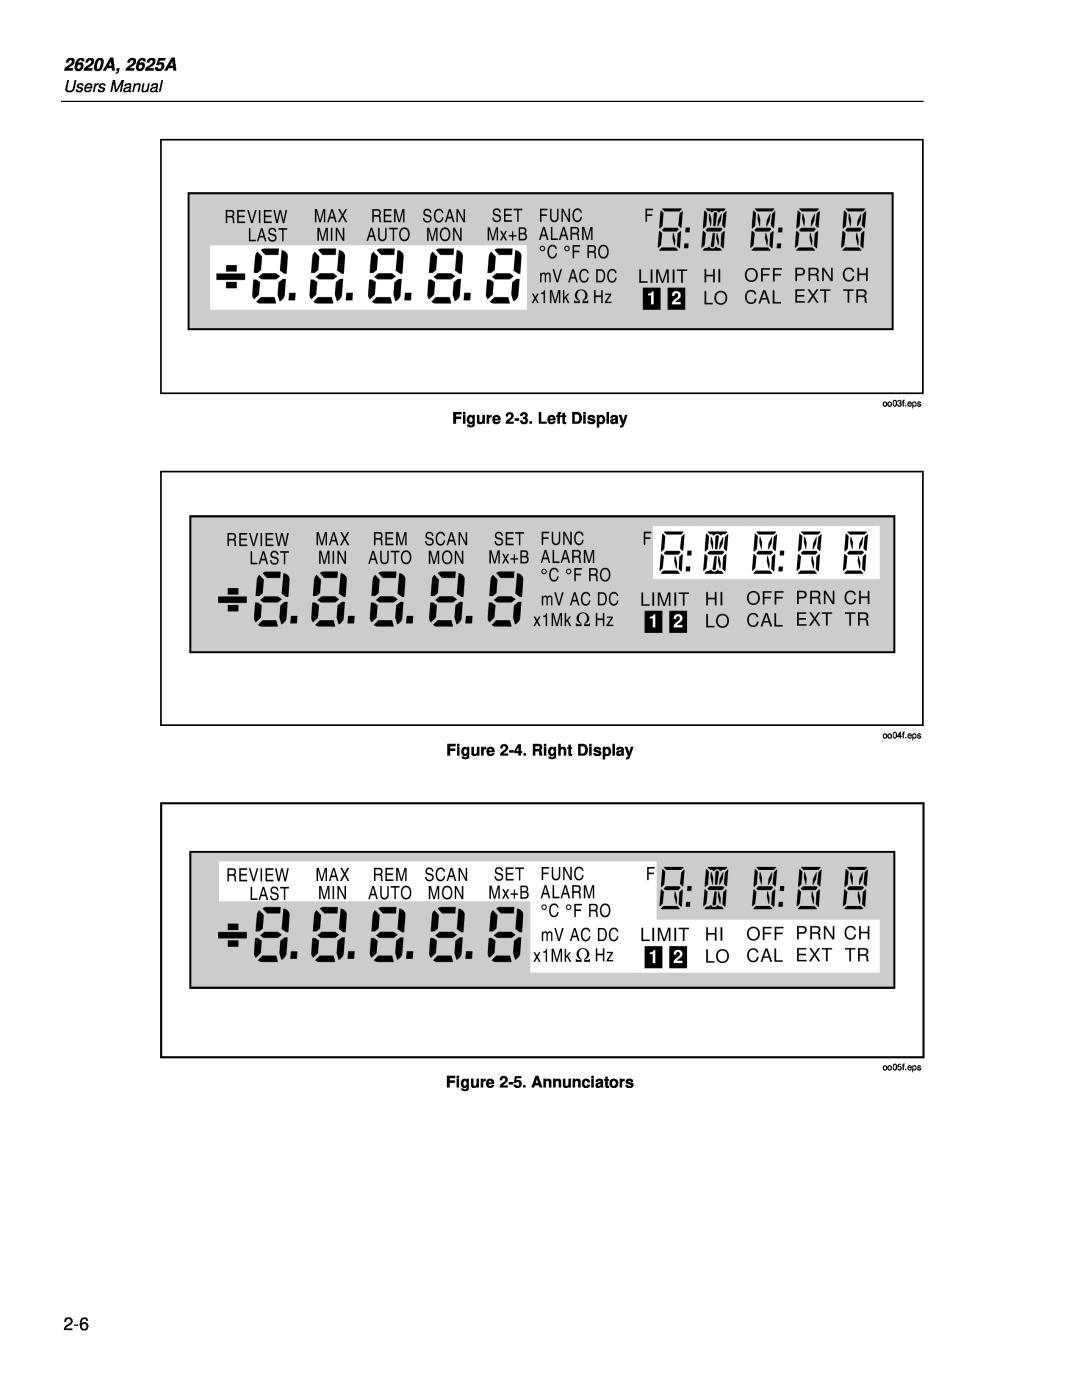 Fluke 2625A, 2620A user manual 3. Left Display, 4. Right Display, 5. Annunciators 